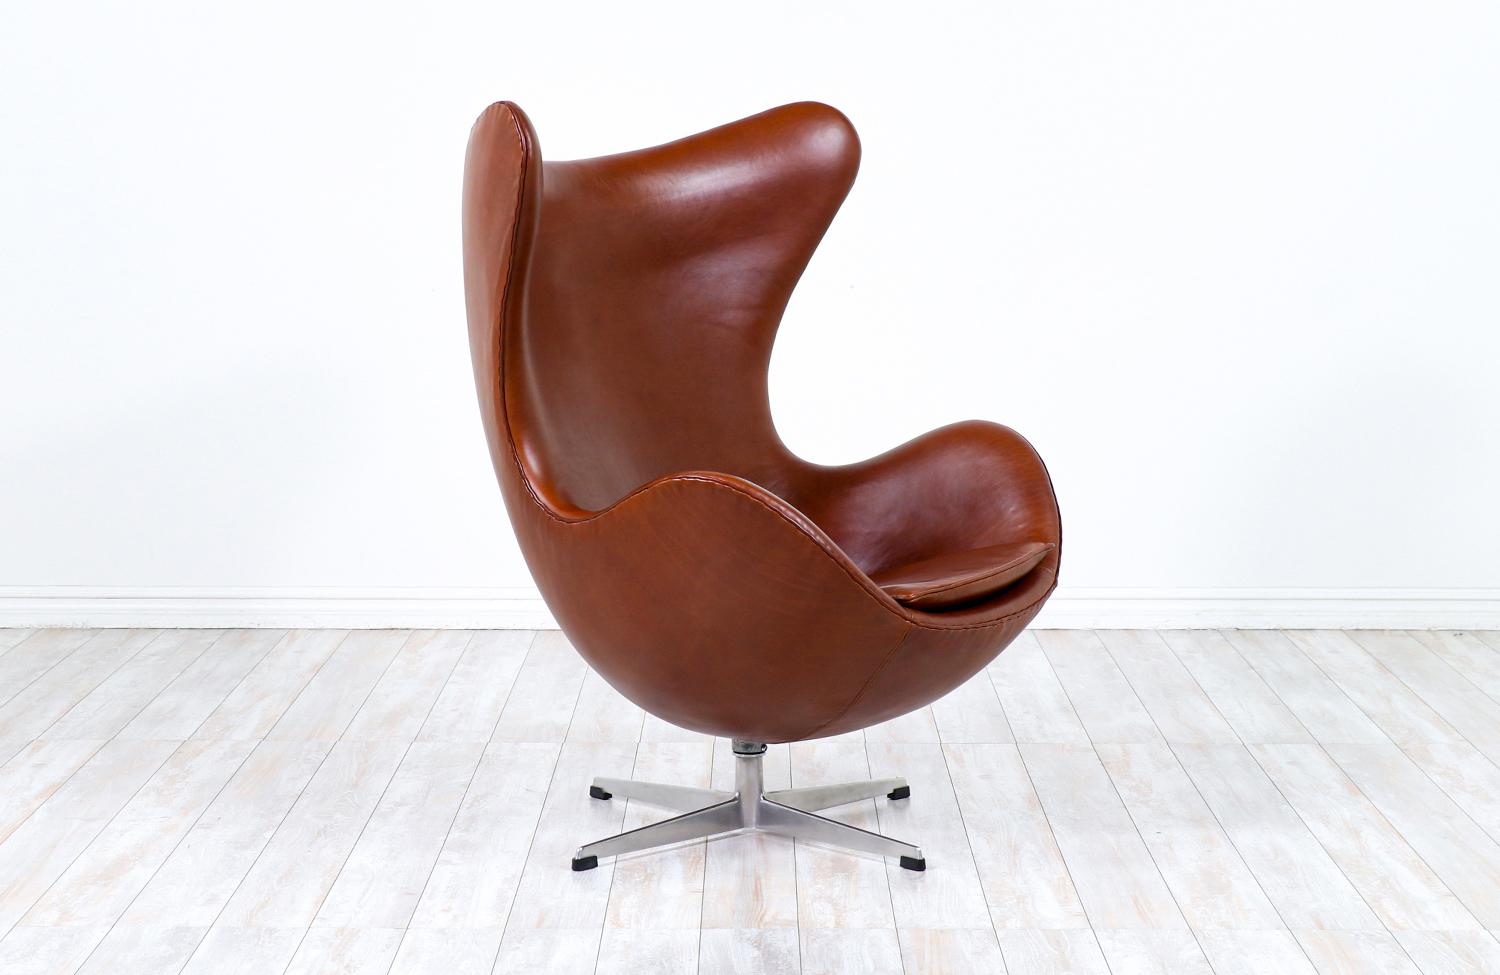 Initially designed for the SAS Royal Hotel in Copenhagen in 1958, the Egg chair has become one of the most acclaimed models of Danish furniture designer, Arne Jacobsen. This iconic design is comprised of a fiberglass shell that is reupholstered in a